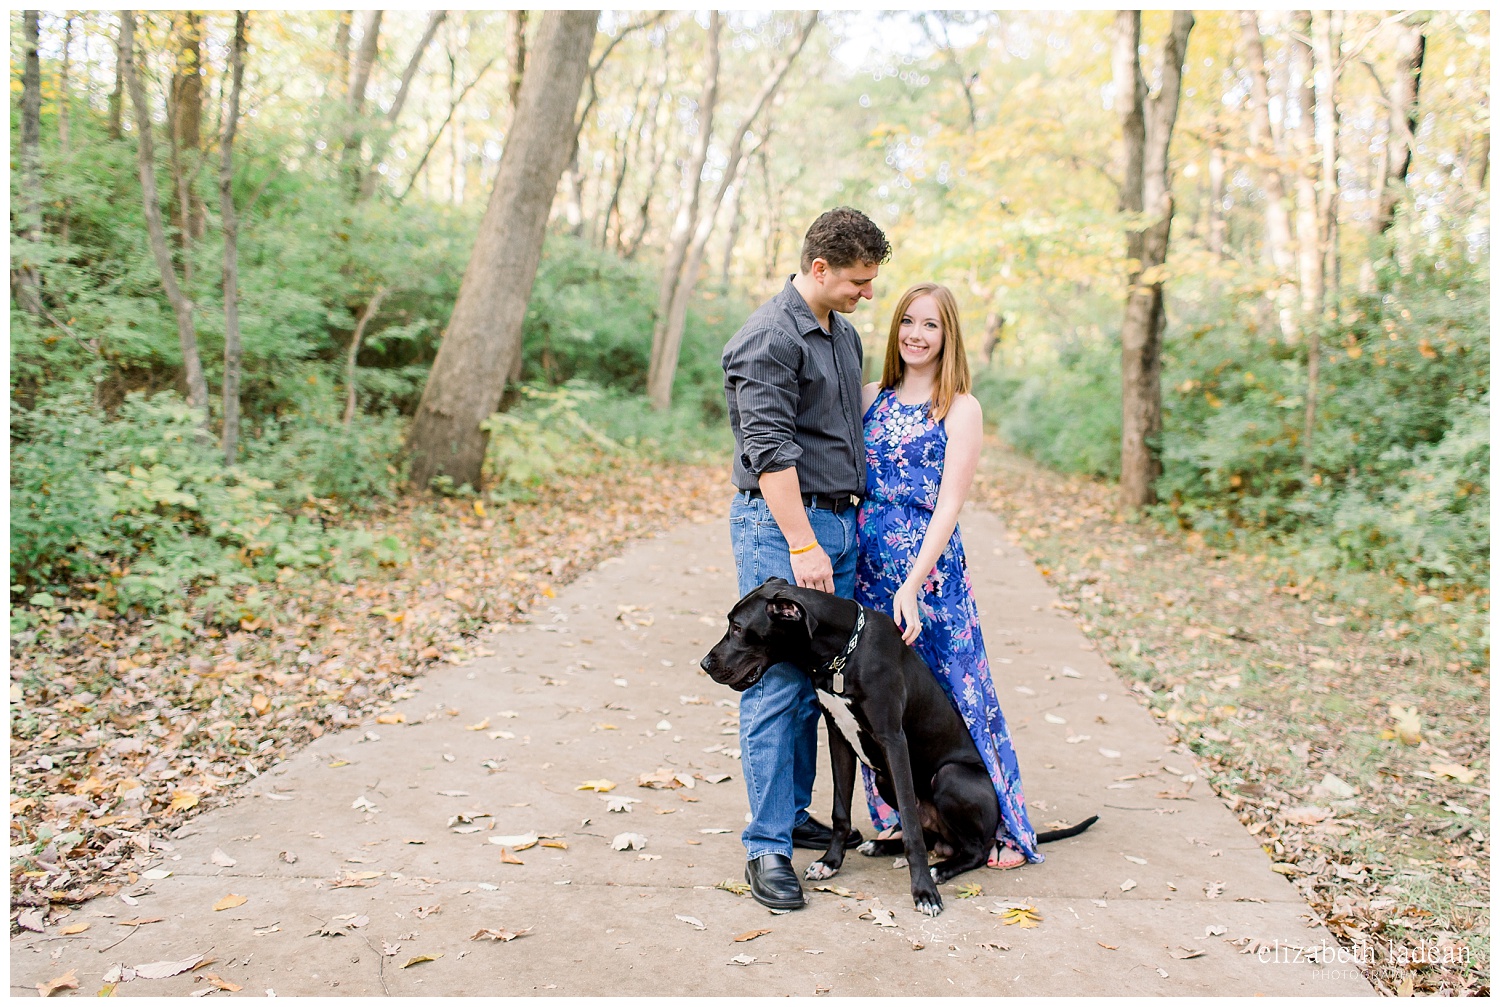 Northland-KC-Fall-Engagement-Photos-with-dog-A+B-2018-elizabeth-ladean-photography-photo_1477.jpg